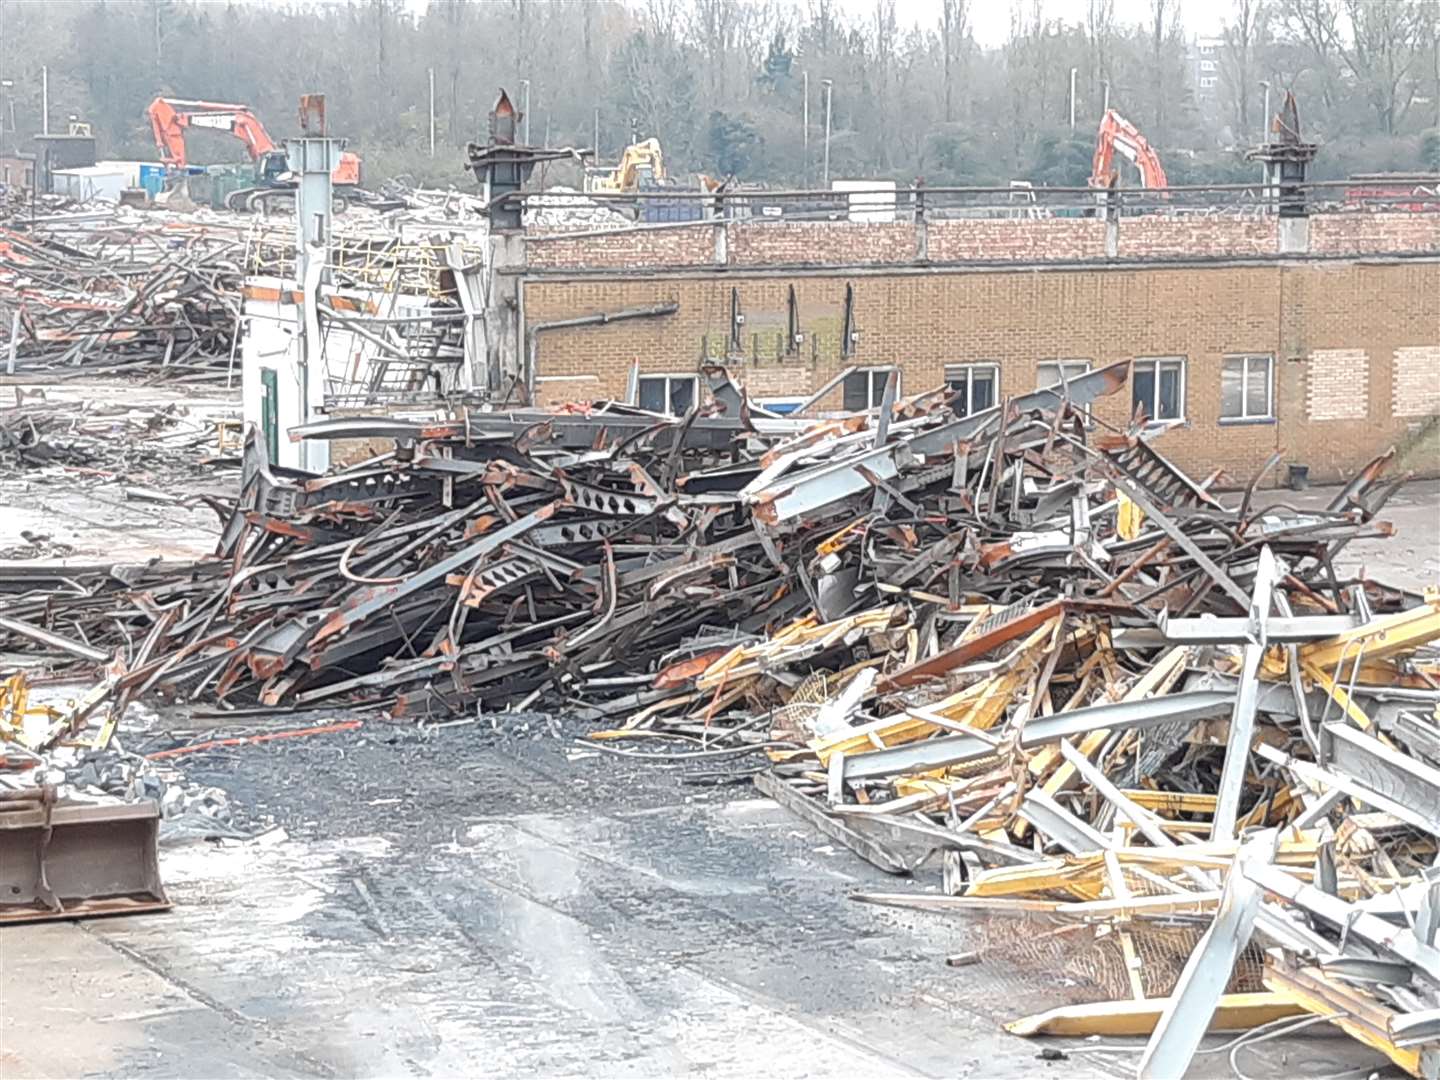 The Ashford railway depot is now being demolished to make way for new sidings